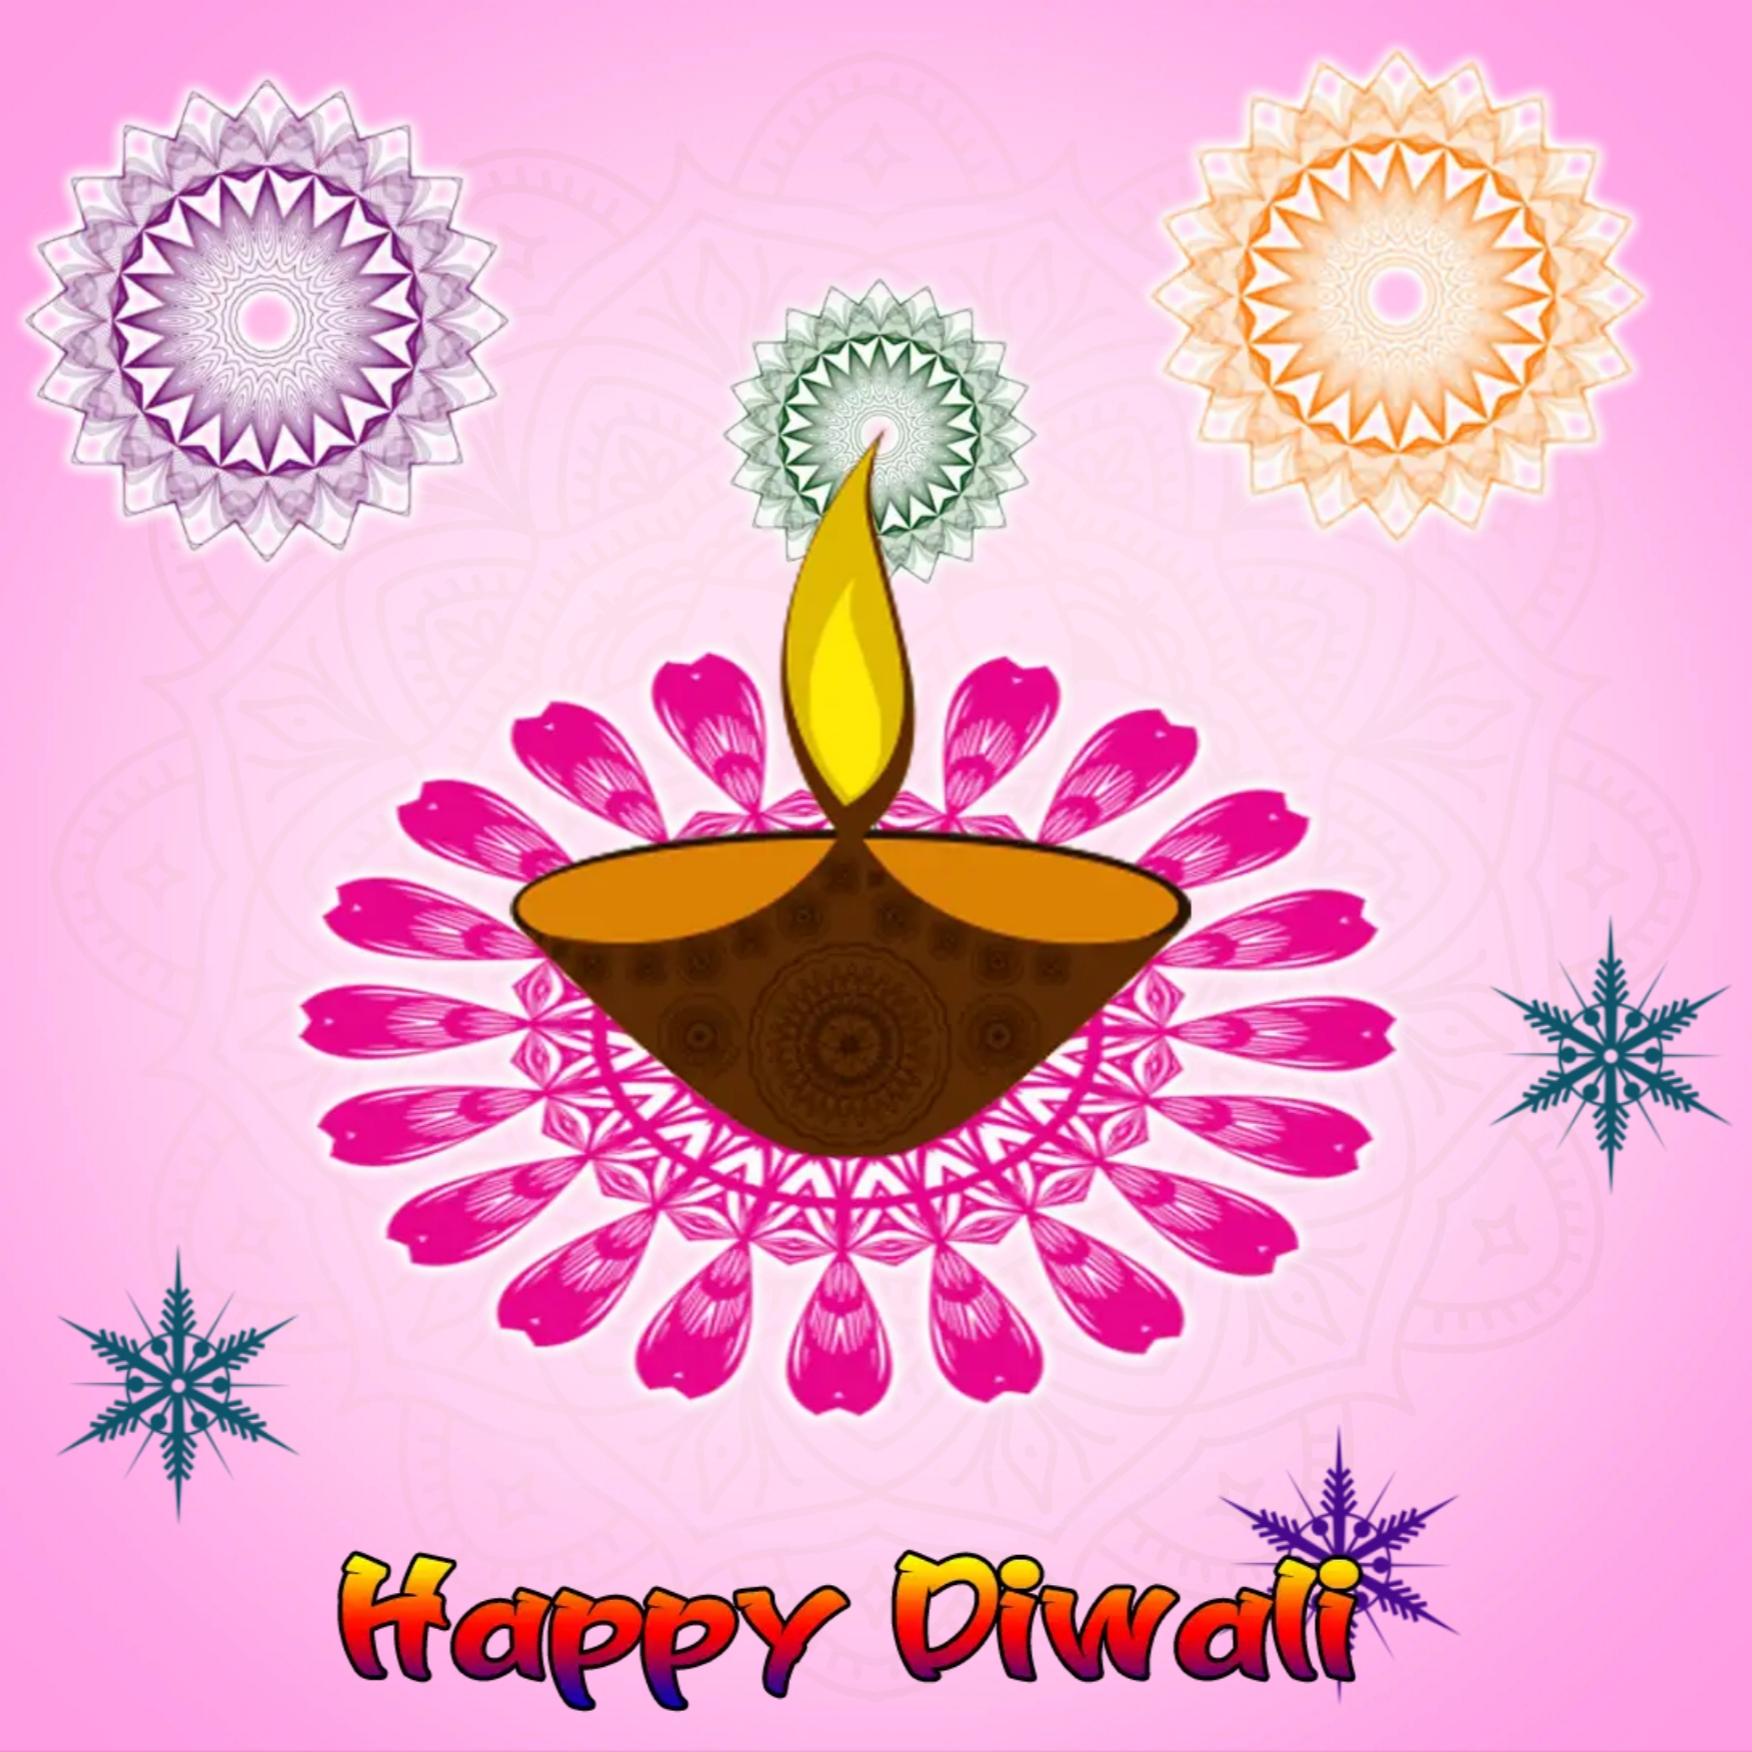 New Happy Diwali Images 2022 HD Download